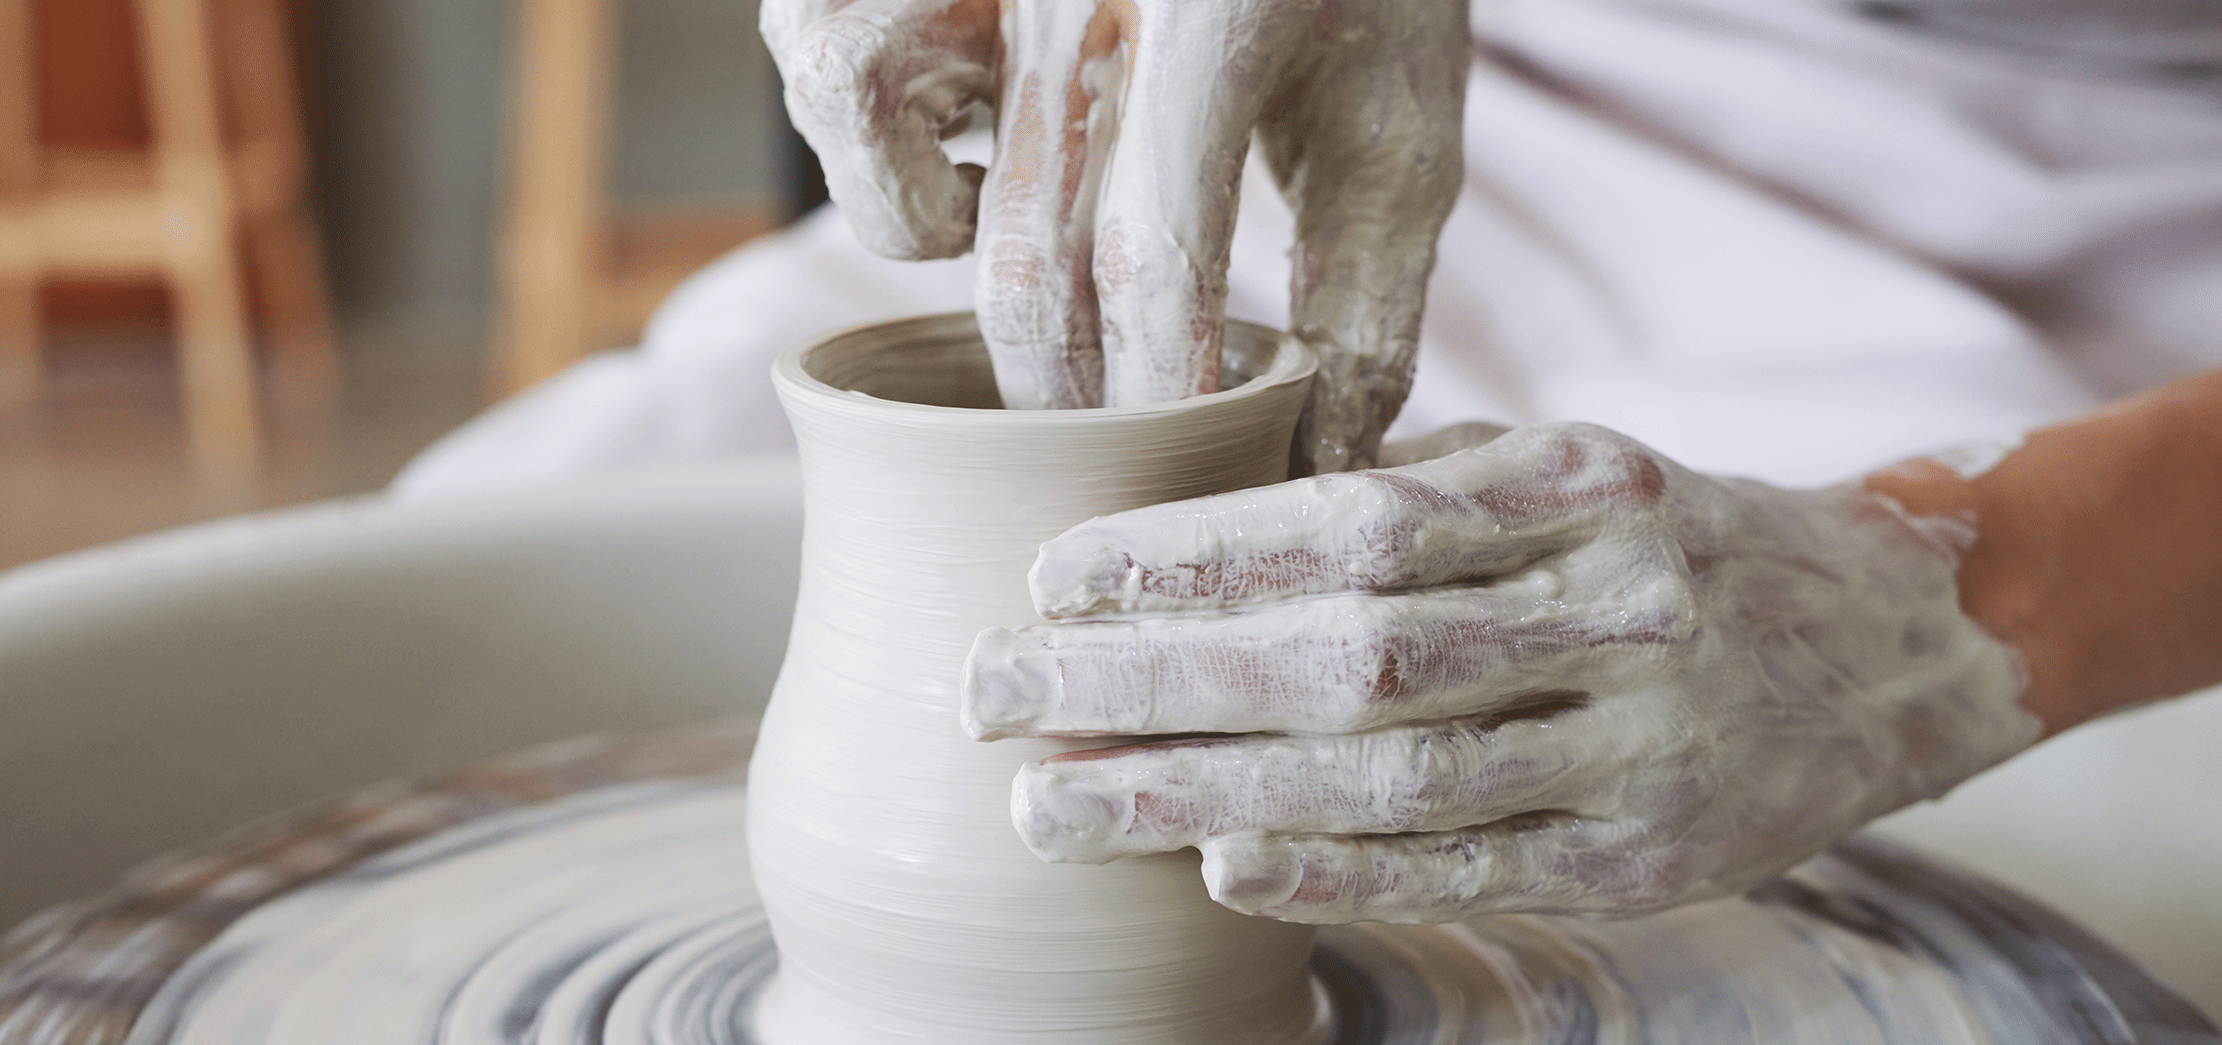 Portuguese Ceramics - Handmade and Hand Painted by True Artisans